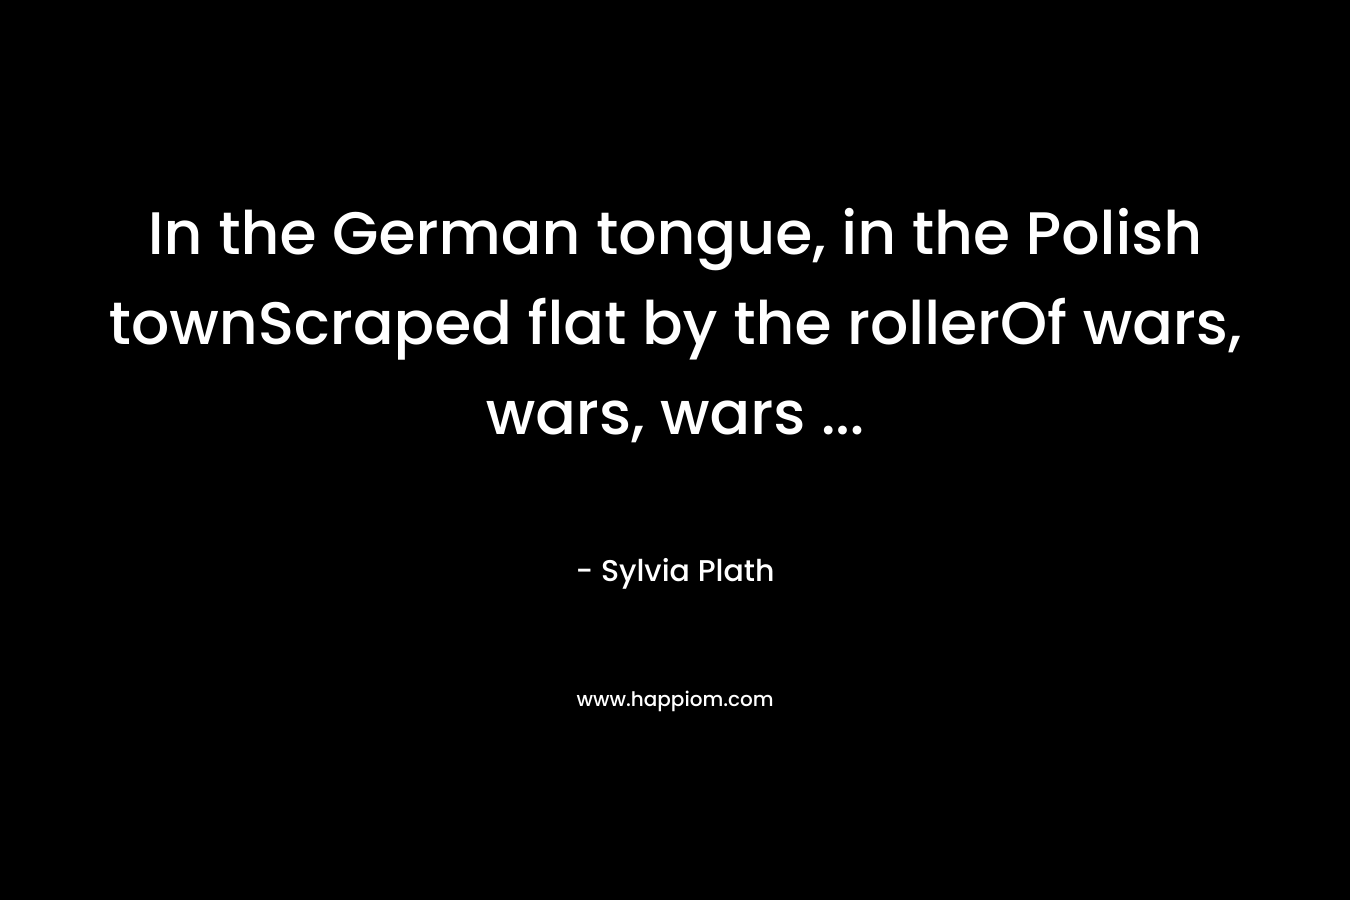 In the German tongue, in the Polish townScraped flat by the rollerOf wars, wars, wars ...